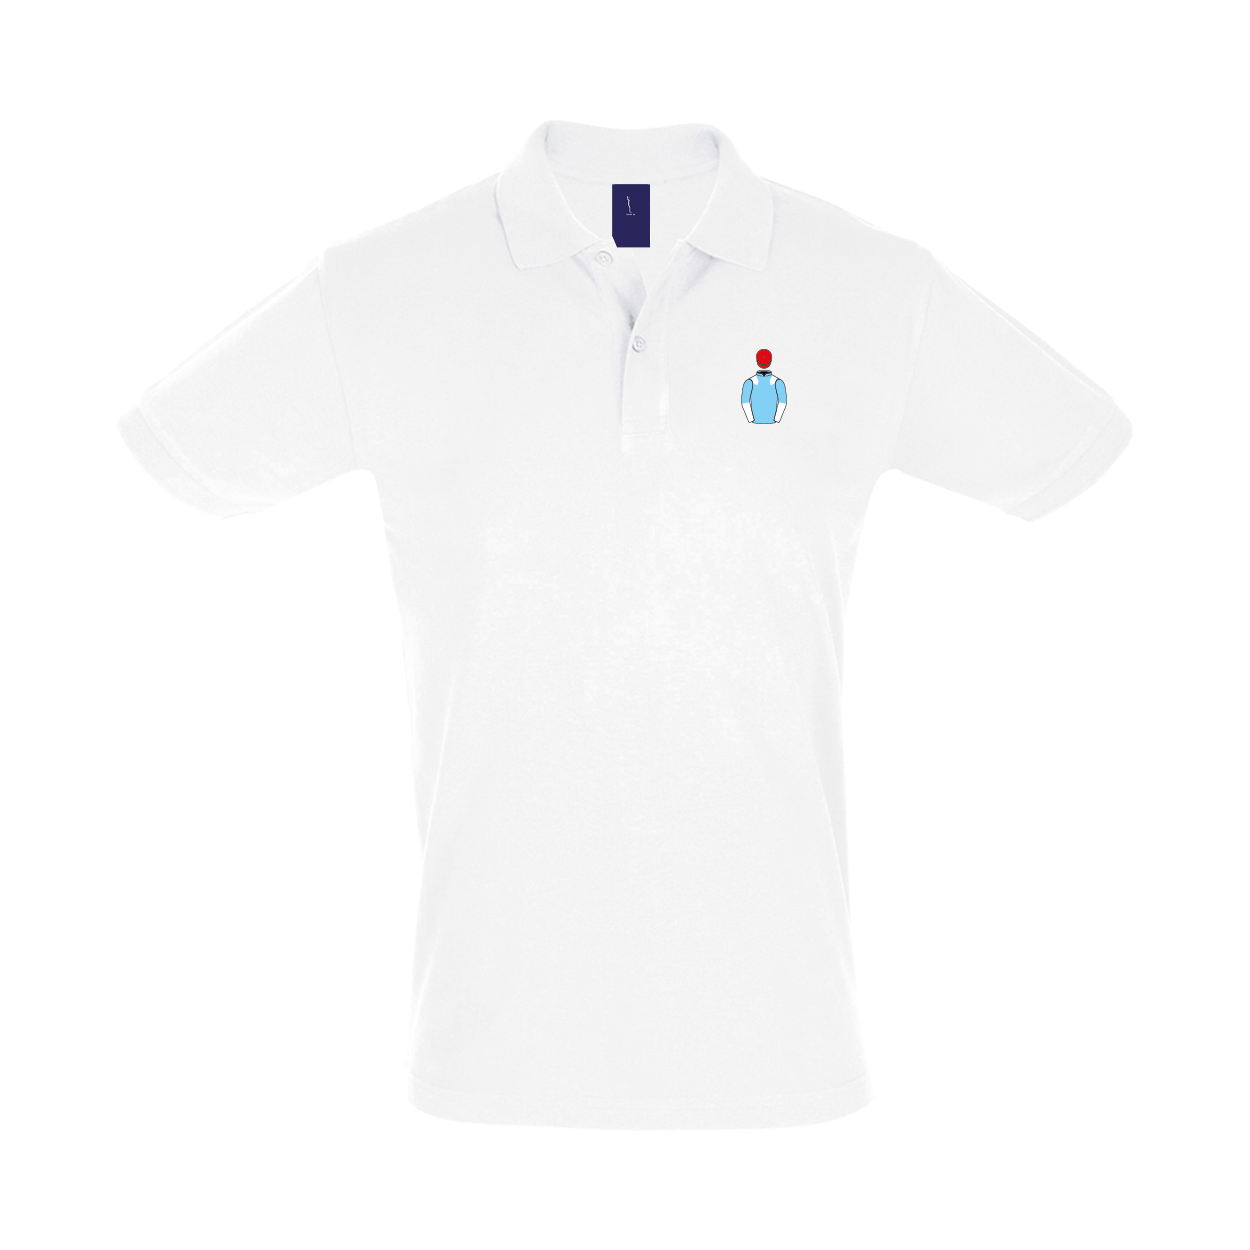 Ladies Foxtrot Racing Embroidered Polo Shirt - Clothing - Hacked Up